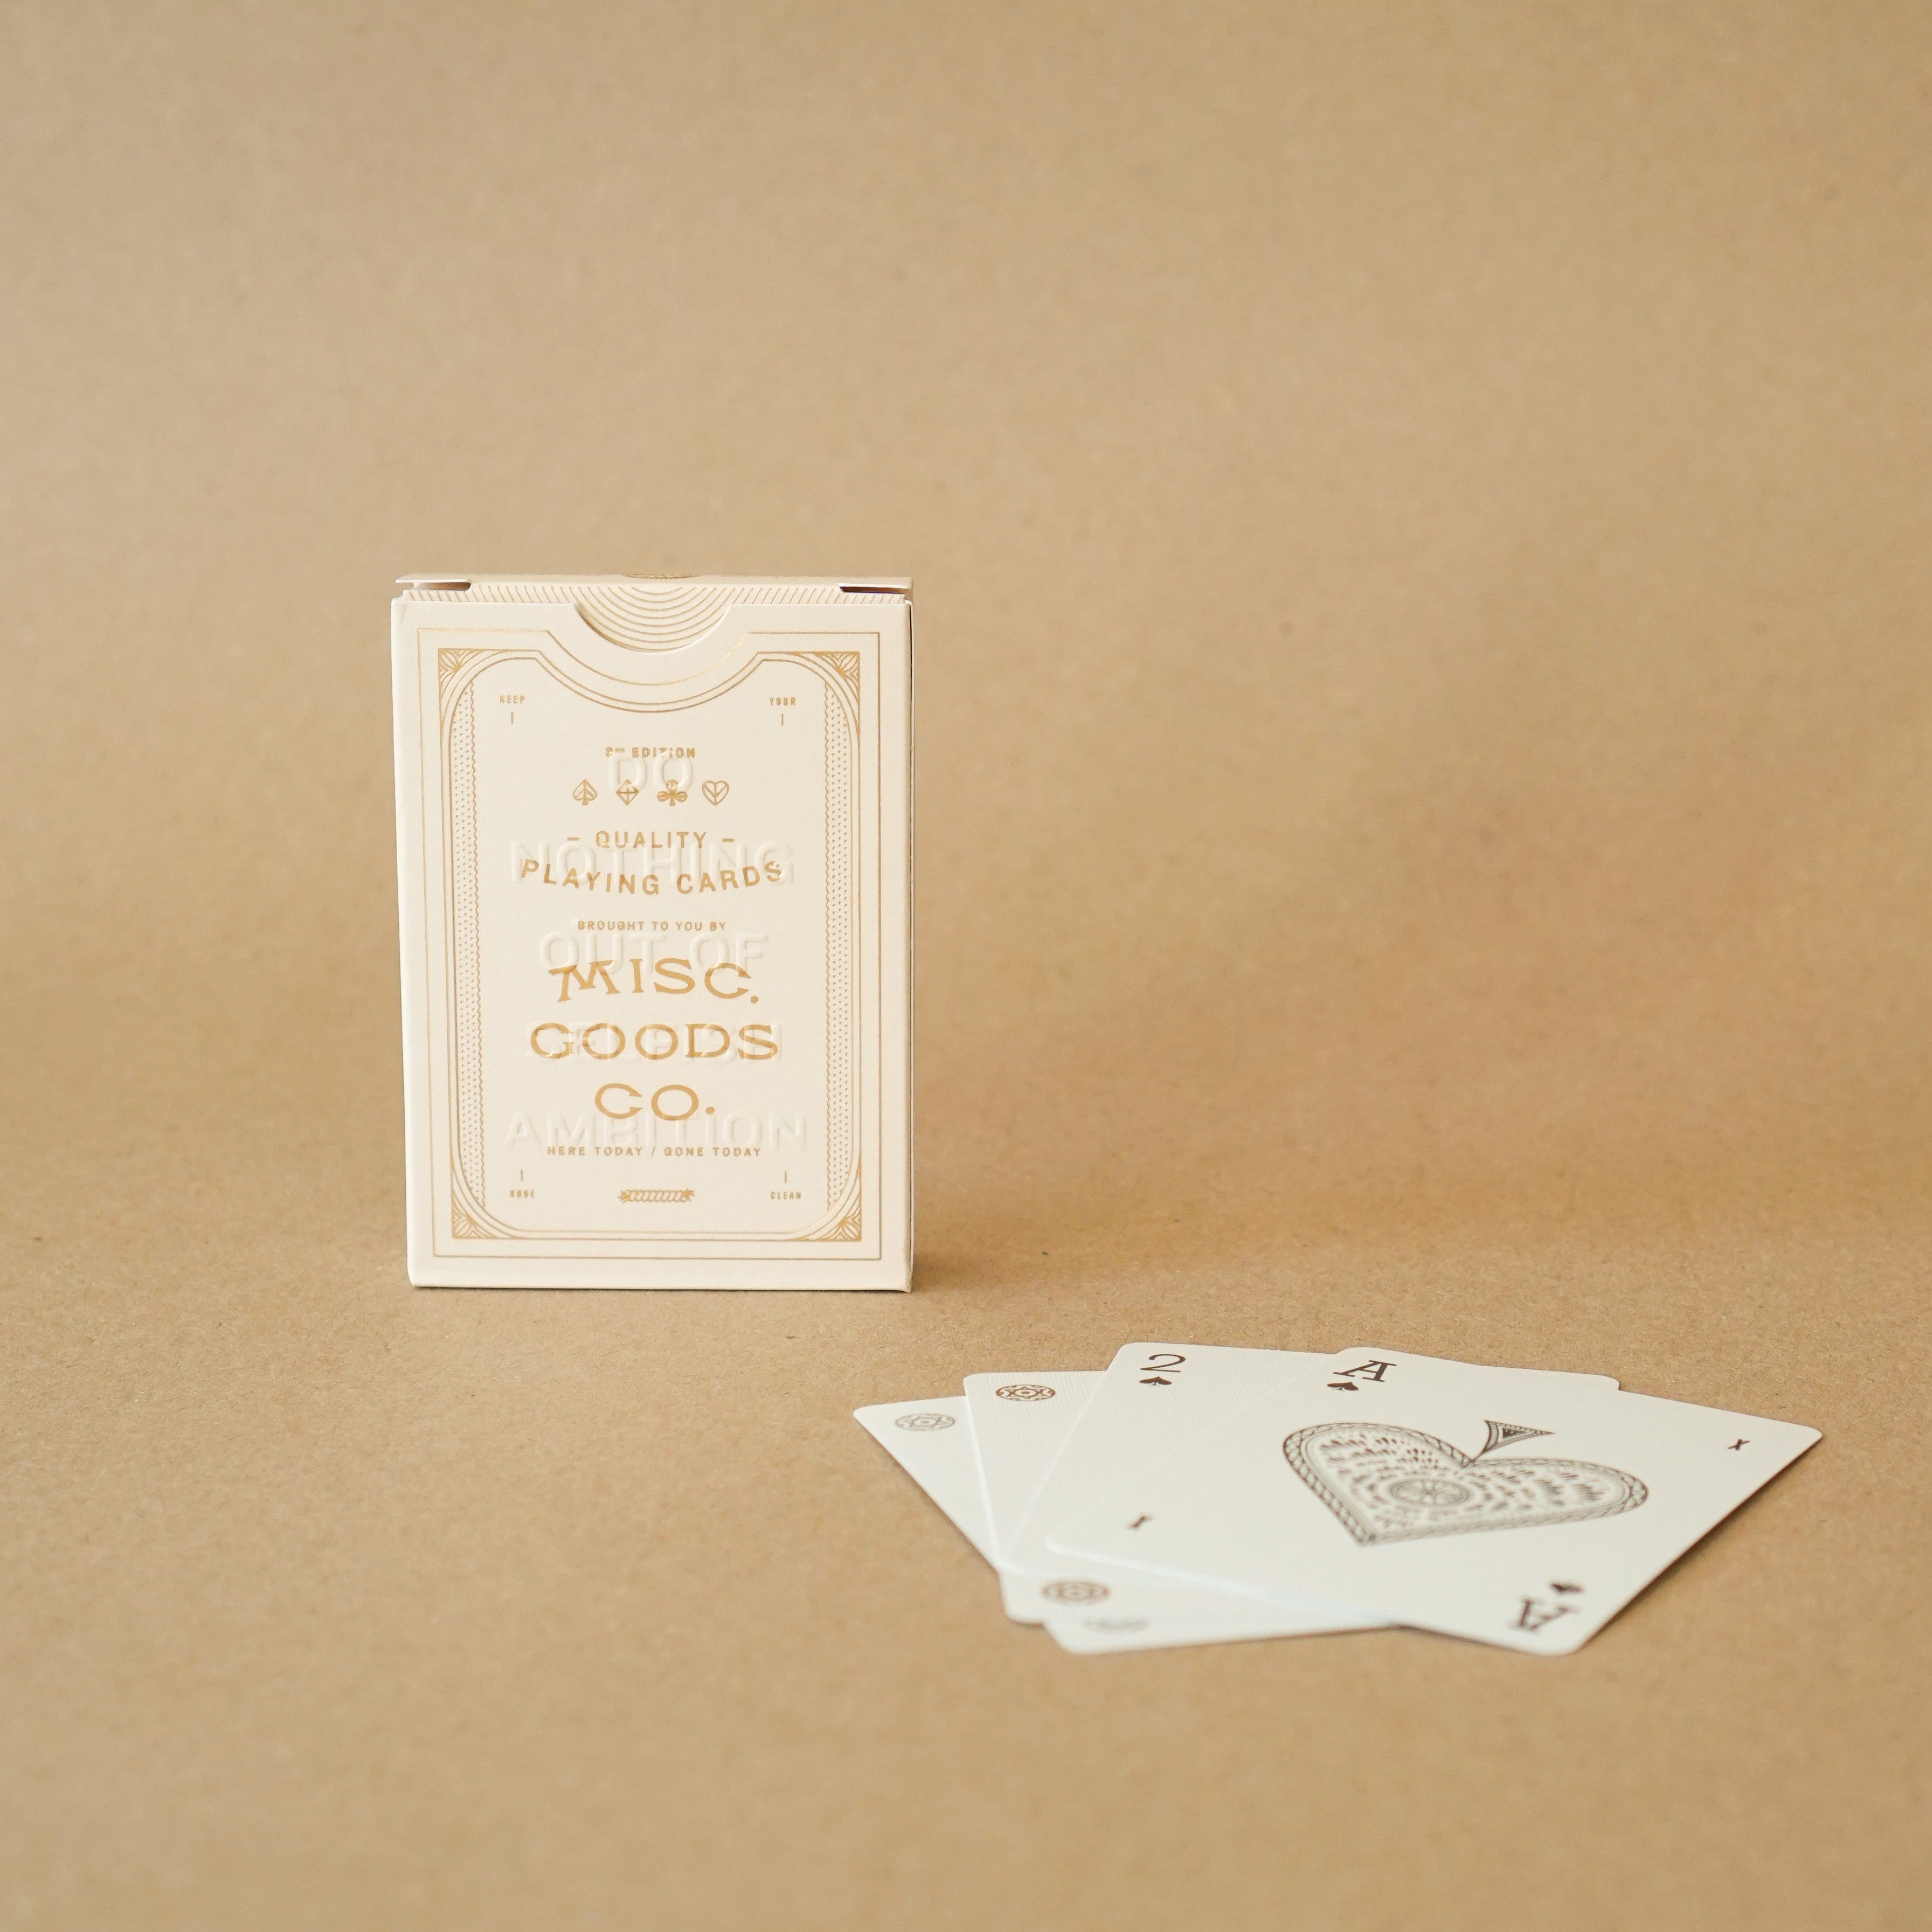 Misc Goods Co. Card Games Ivory Playing Cards